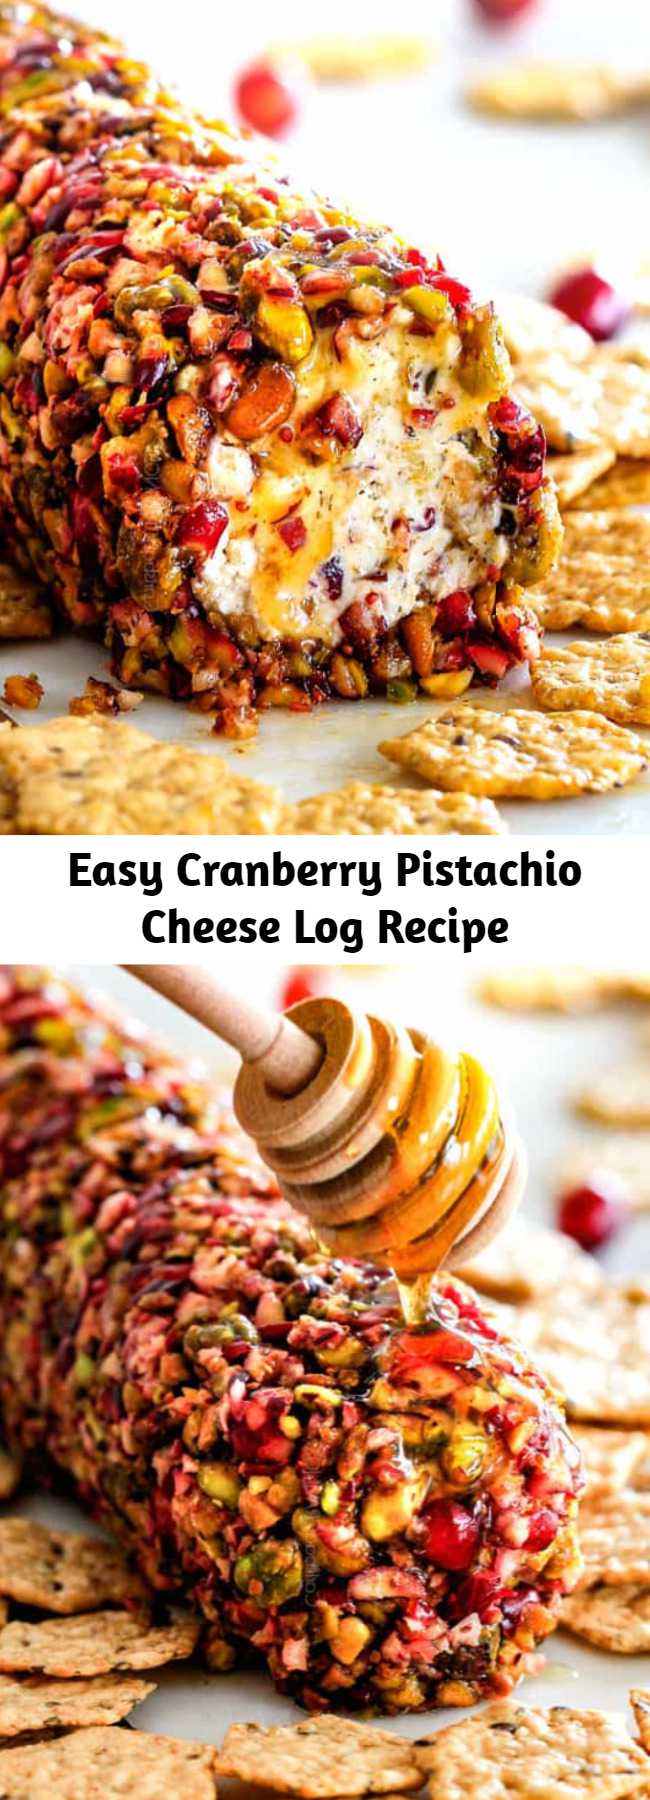 Easy Cranberry Pistachio Cheese Log Recipe - 10 Minute prep creamy, sweet and tangy Cranberry Pistachio Cheese Log is the EASIEST yet most impressive appetizer you will ever make! This festive goat cheese log can be made DAYS in advance so it’s the perfect stress-free appetizer for Thanksgiving, Christmas or any holiday party! #appetizer #easyrecipe #easydinner #easydinnerrecipe #recipe #recipeoftheday #Thanksgiving #recipeideas #recipeseasy #christmas #christmasrecipes #Thanksgivingrecipes